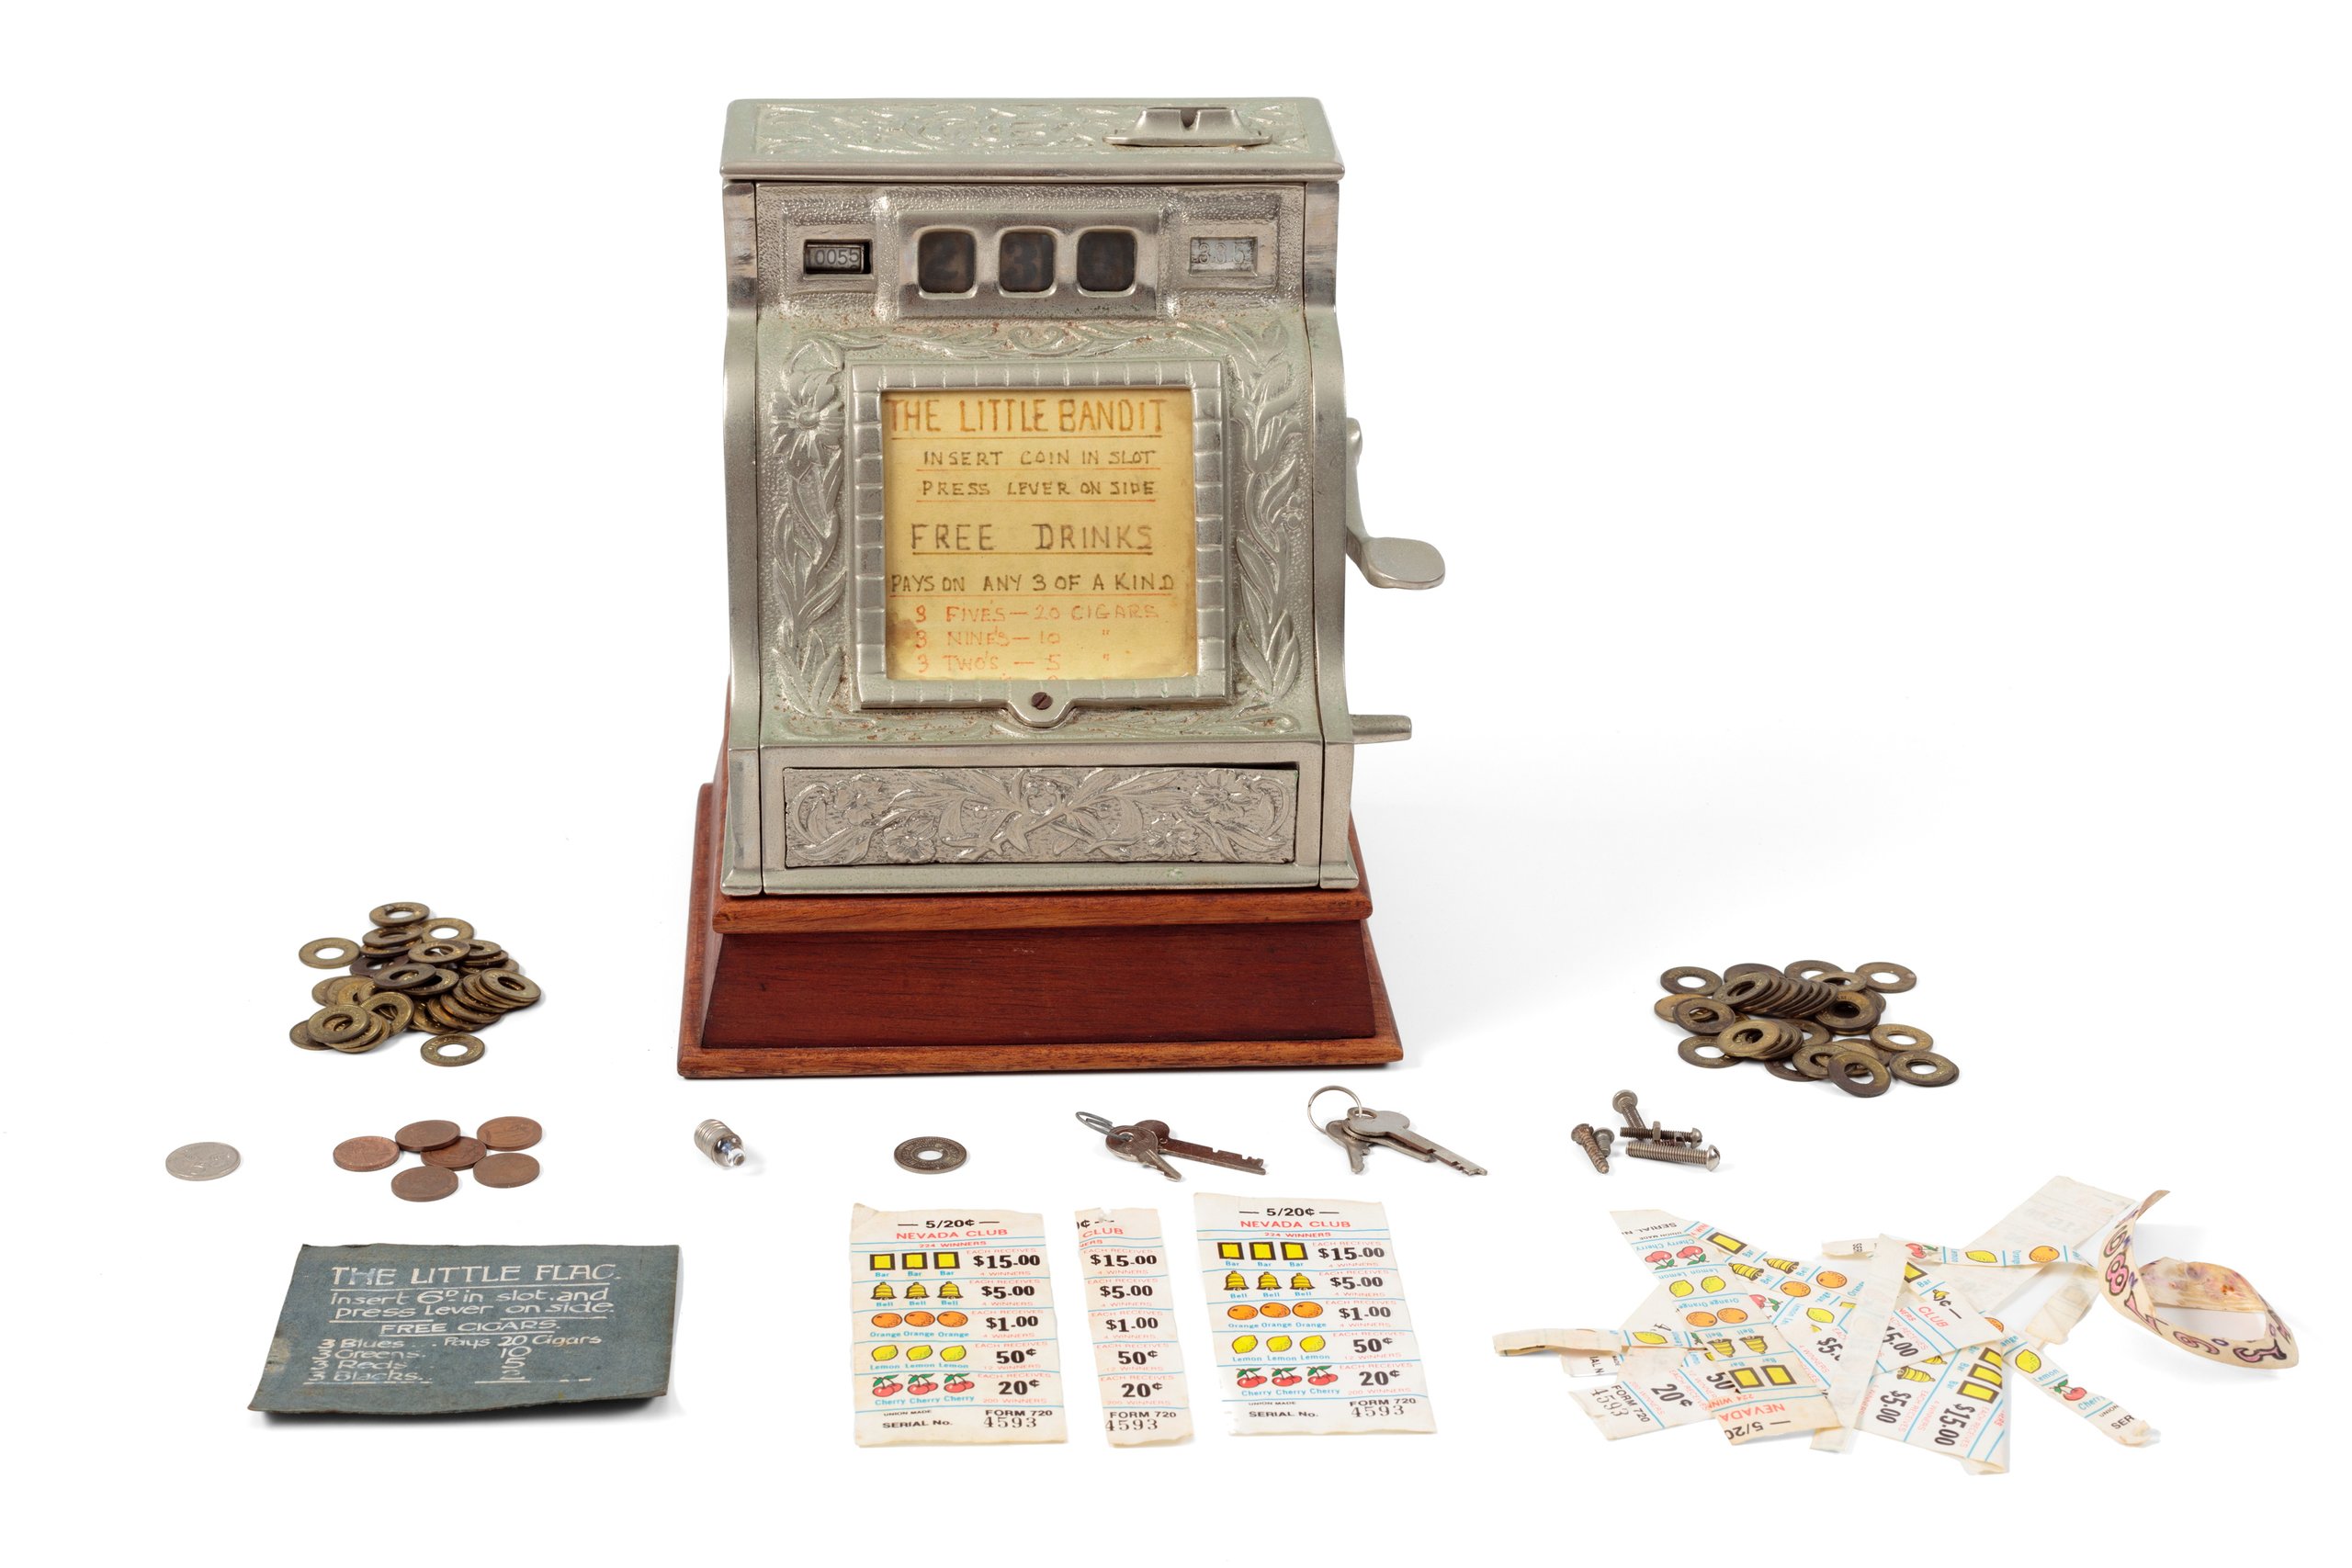 'The Little Bandit' poker machine by Caille Bros